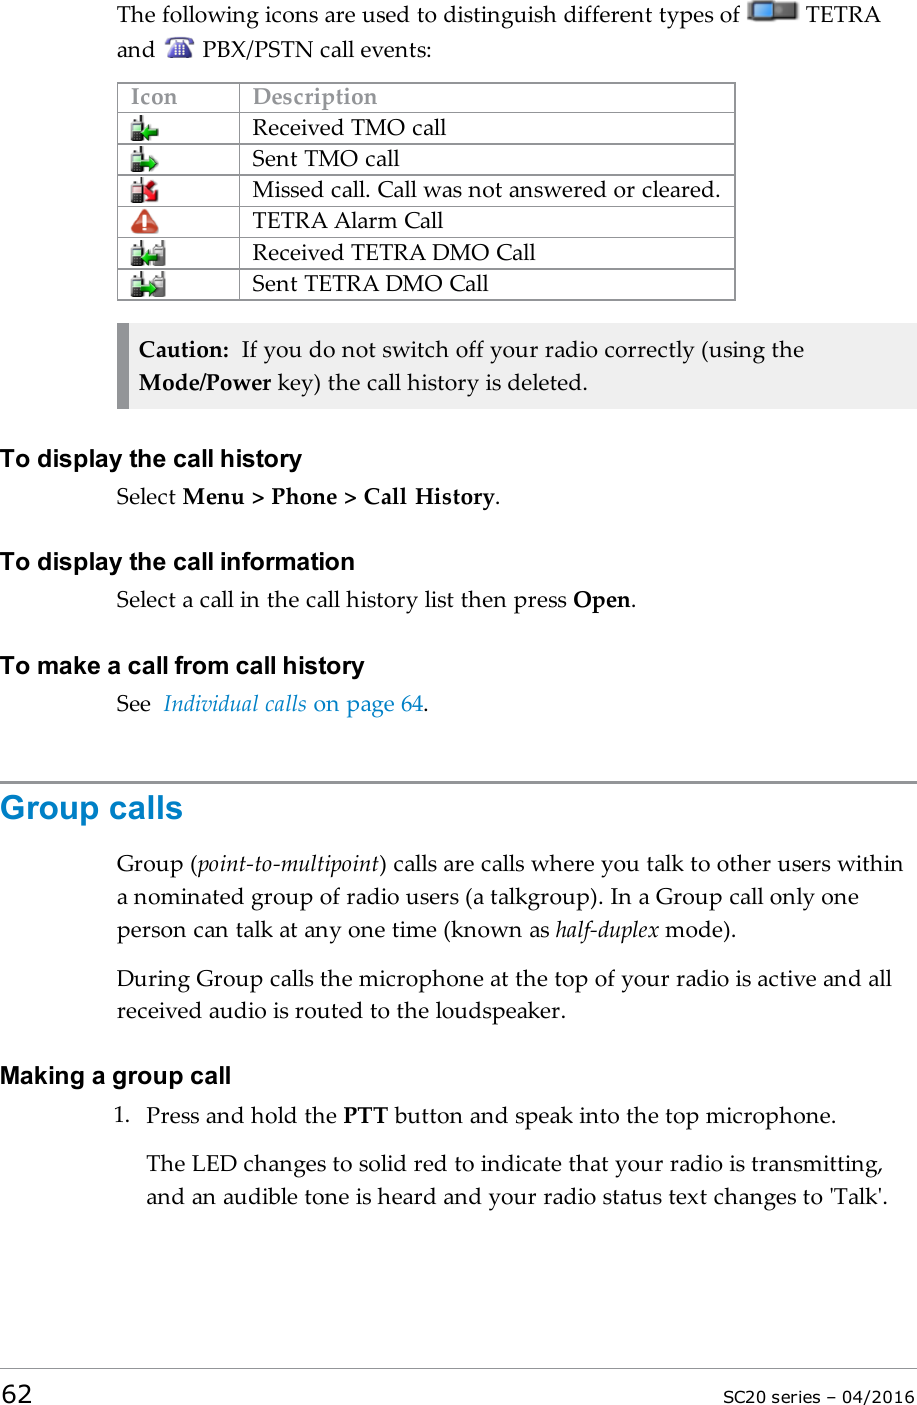 The following icons are used to distinguish different types of TETRAand PBX/PSTN call events:Icon DescriptionReceived TMO callSent TMO callMissed call. Call was not answered or cleared.TETRA Alarm CallReceived TETRA DMO CallSent TETRA DMO CallCaution: If you do not switch off your radio correctly (using theMode/Power key) the call history is deleted.To display the call historySelect Menu &gt; Phone &gt; Call History.To display the call informationSelect a call in the call history list then press Open.To make a call from call historySee Individual calls on page 64.Group callsGroup (point-to-multipoint) calls are calls where you talk to other users withina nominated group of radio users (a talkgroup). In a Group call only oneperson can talk at any one time (known as half-duplex mode).During Group calls the microphone at the top of your radio is active and allreceived audio is routed to the loudspeaker.Making a group call1. Press and hold the PTT button and speak into the top microphone.The LEDchanges to solid red to indicate that your radio is transmitting,and an audible tone is heard and your radio status text changes to &apos;Talk&apos;.62 SC20 series – 04/2016